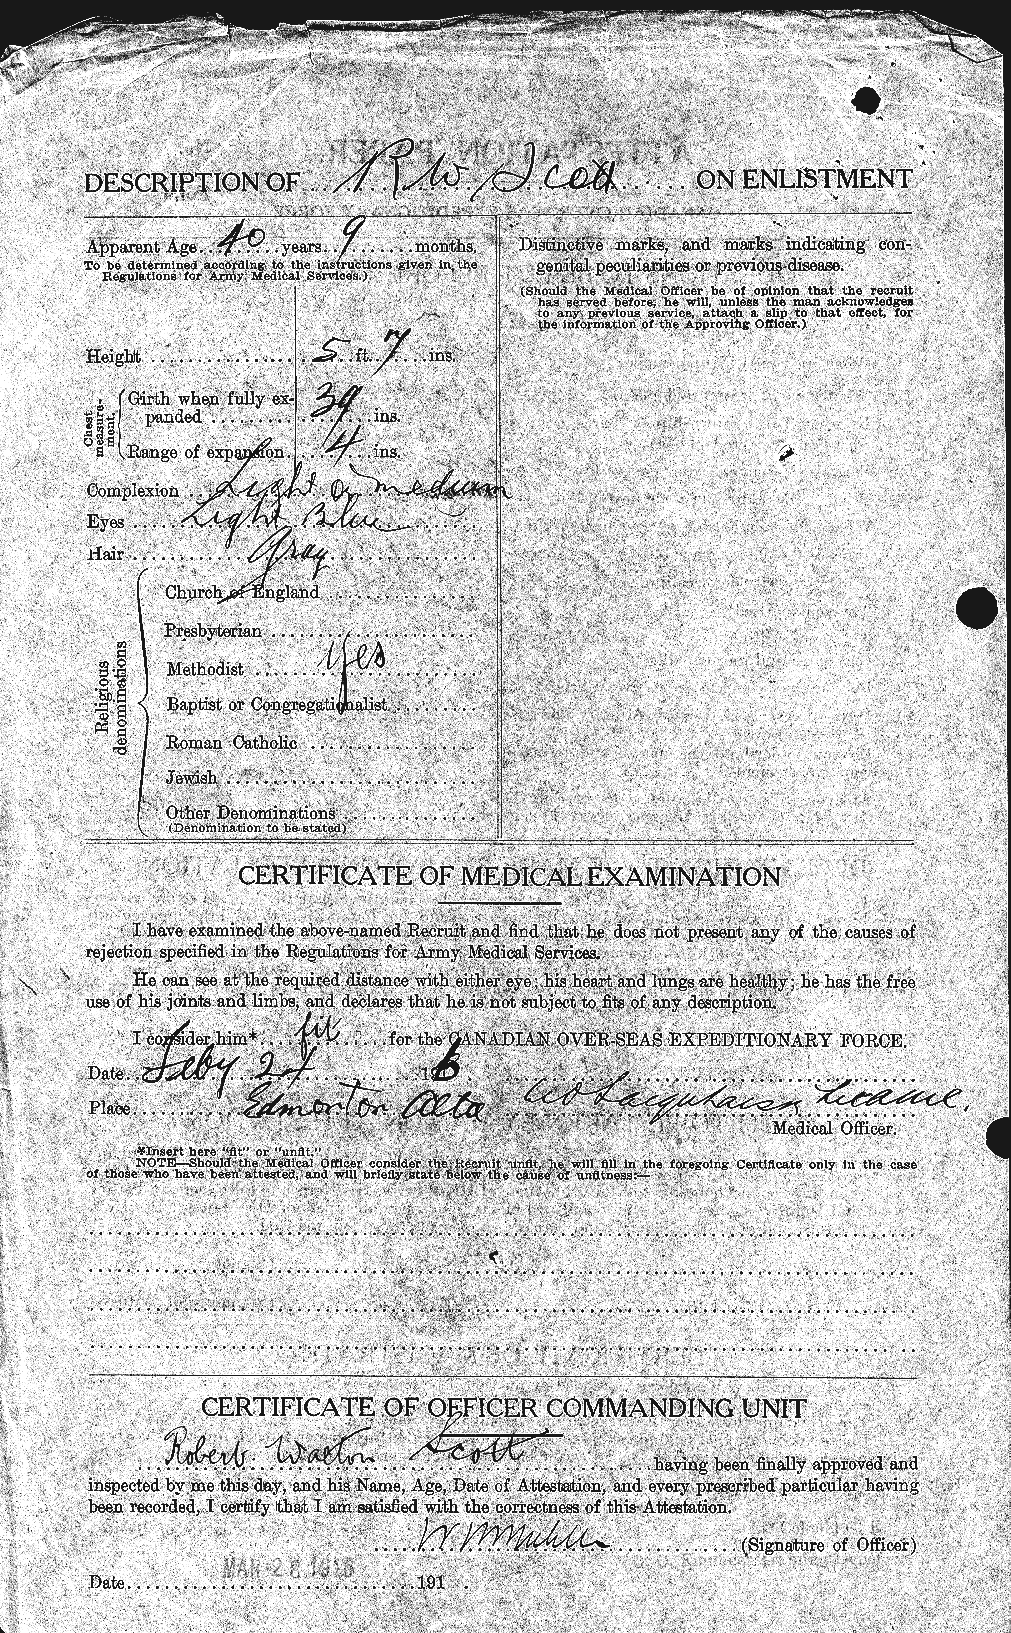 Personnel Records of the First World War - CEF 089115b